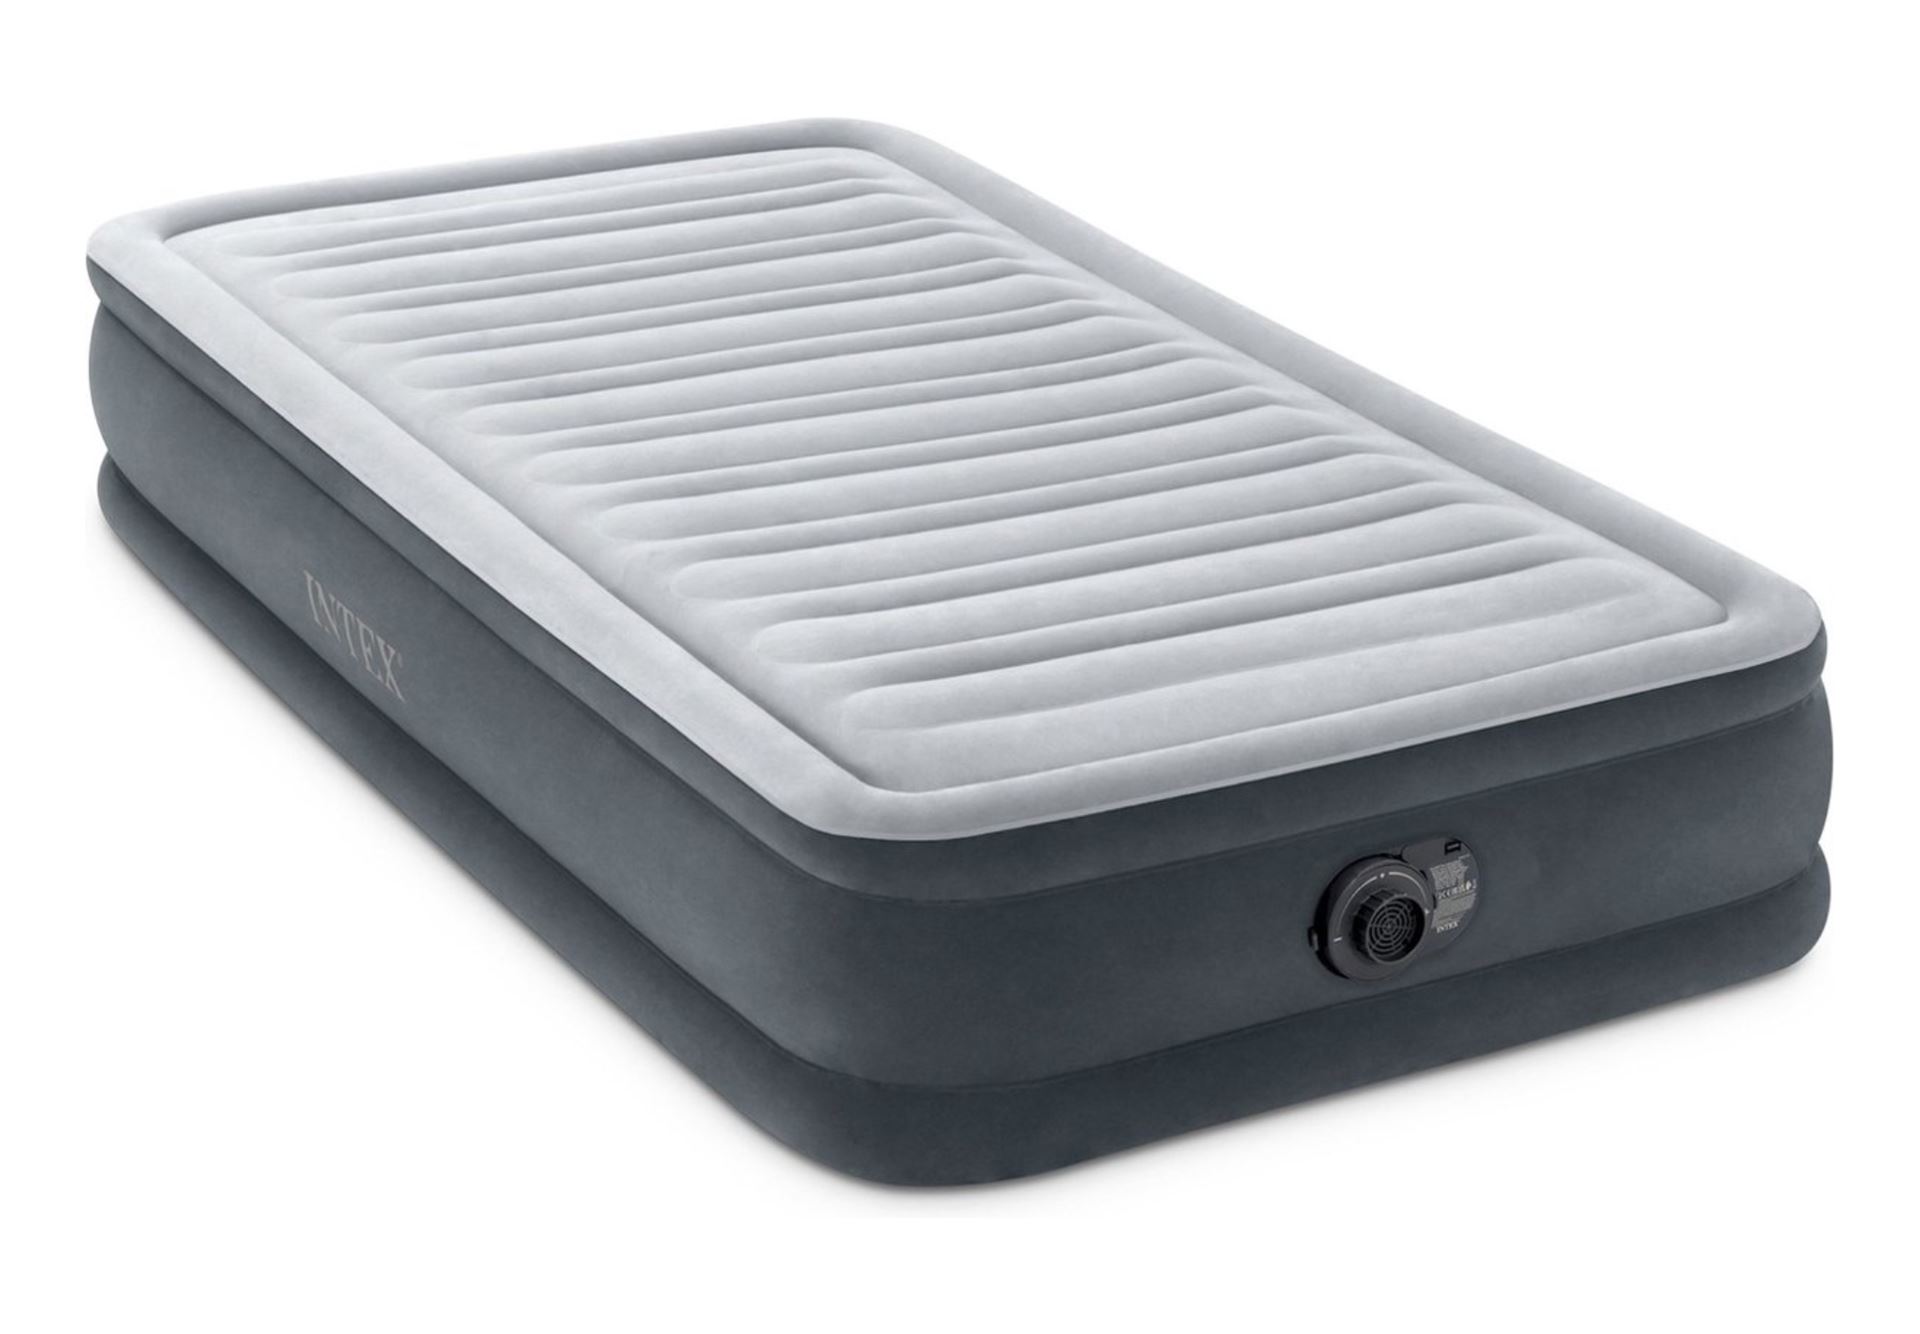 twin-comfort-plush-airbed-with-fiber-tech-rp-w-220-240v-internal-pump